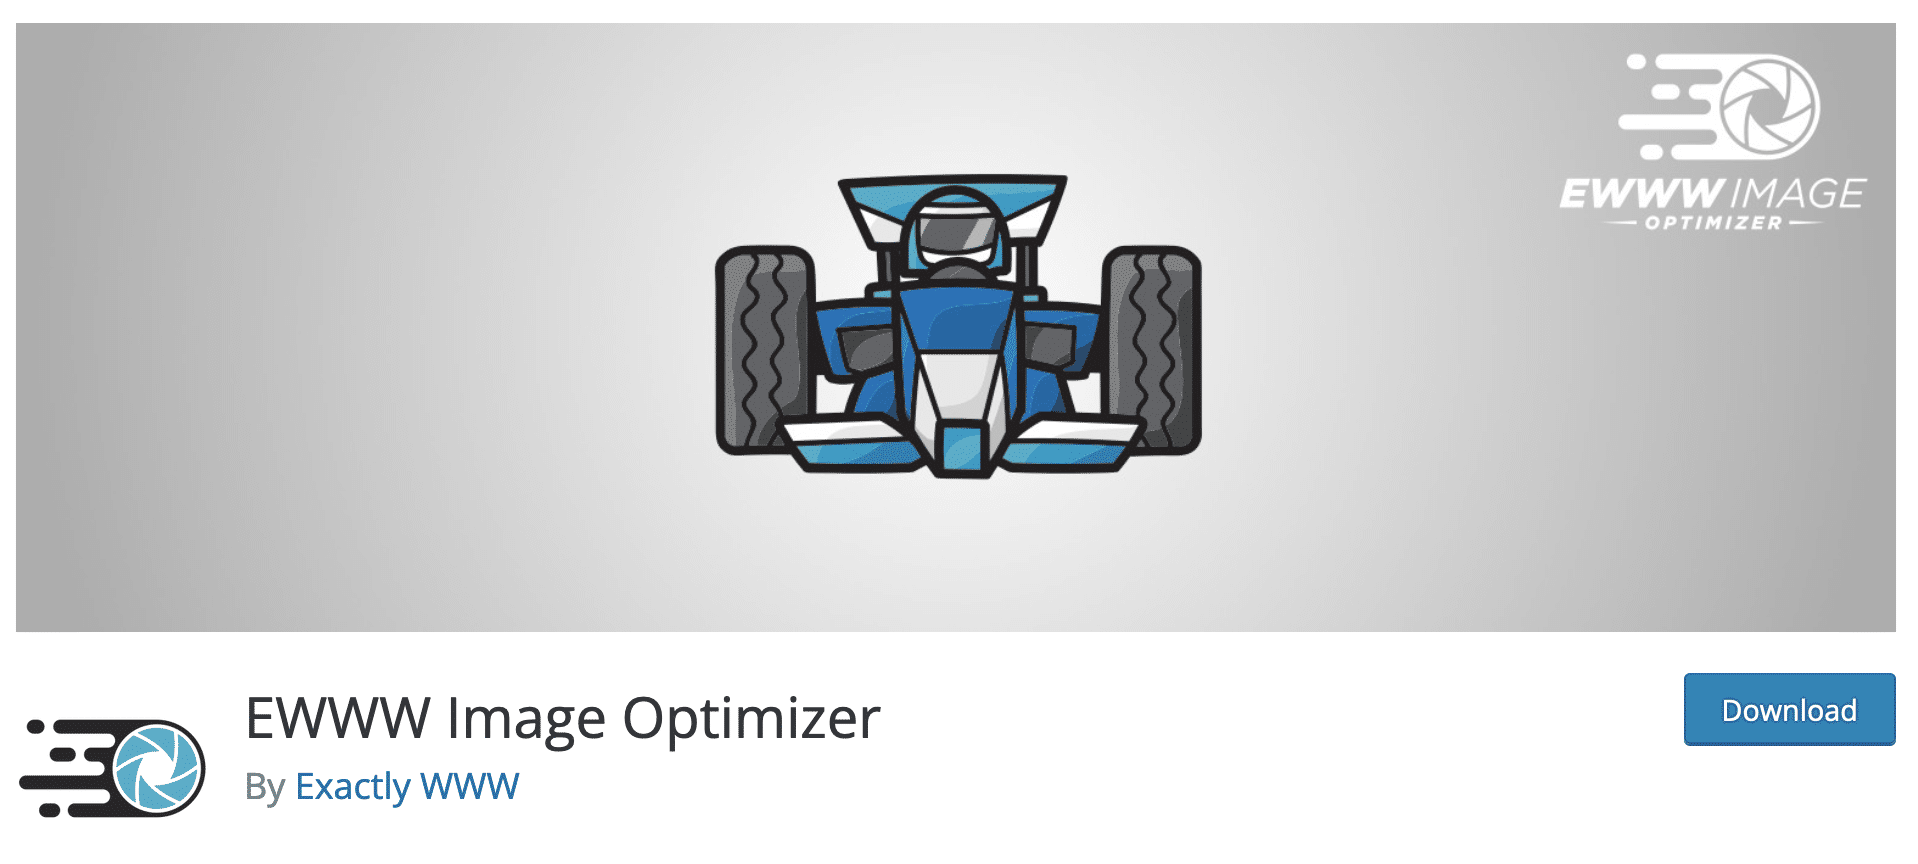 EWWW Image Optimizer is a WordPress plugin to reduce the weight of your photos. 